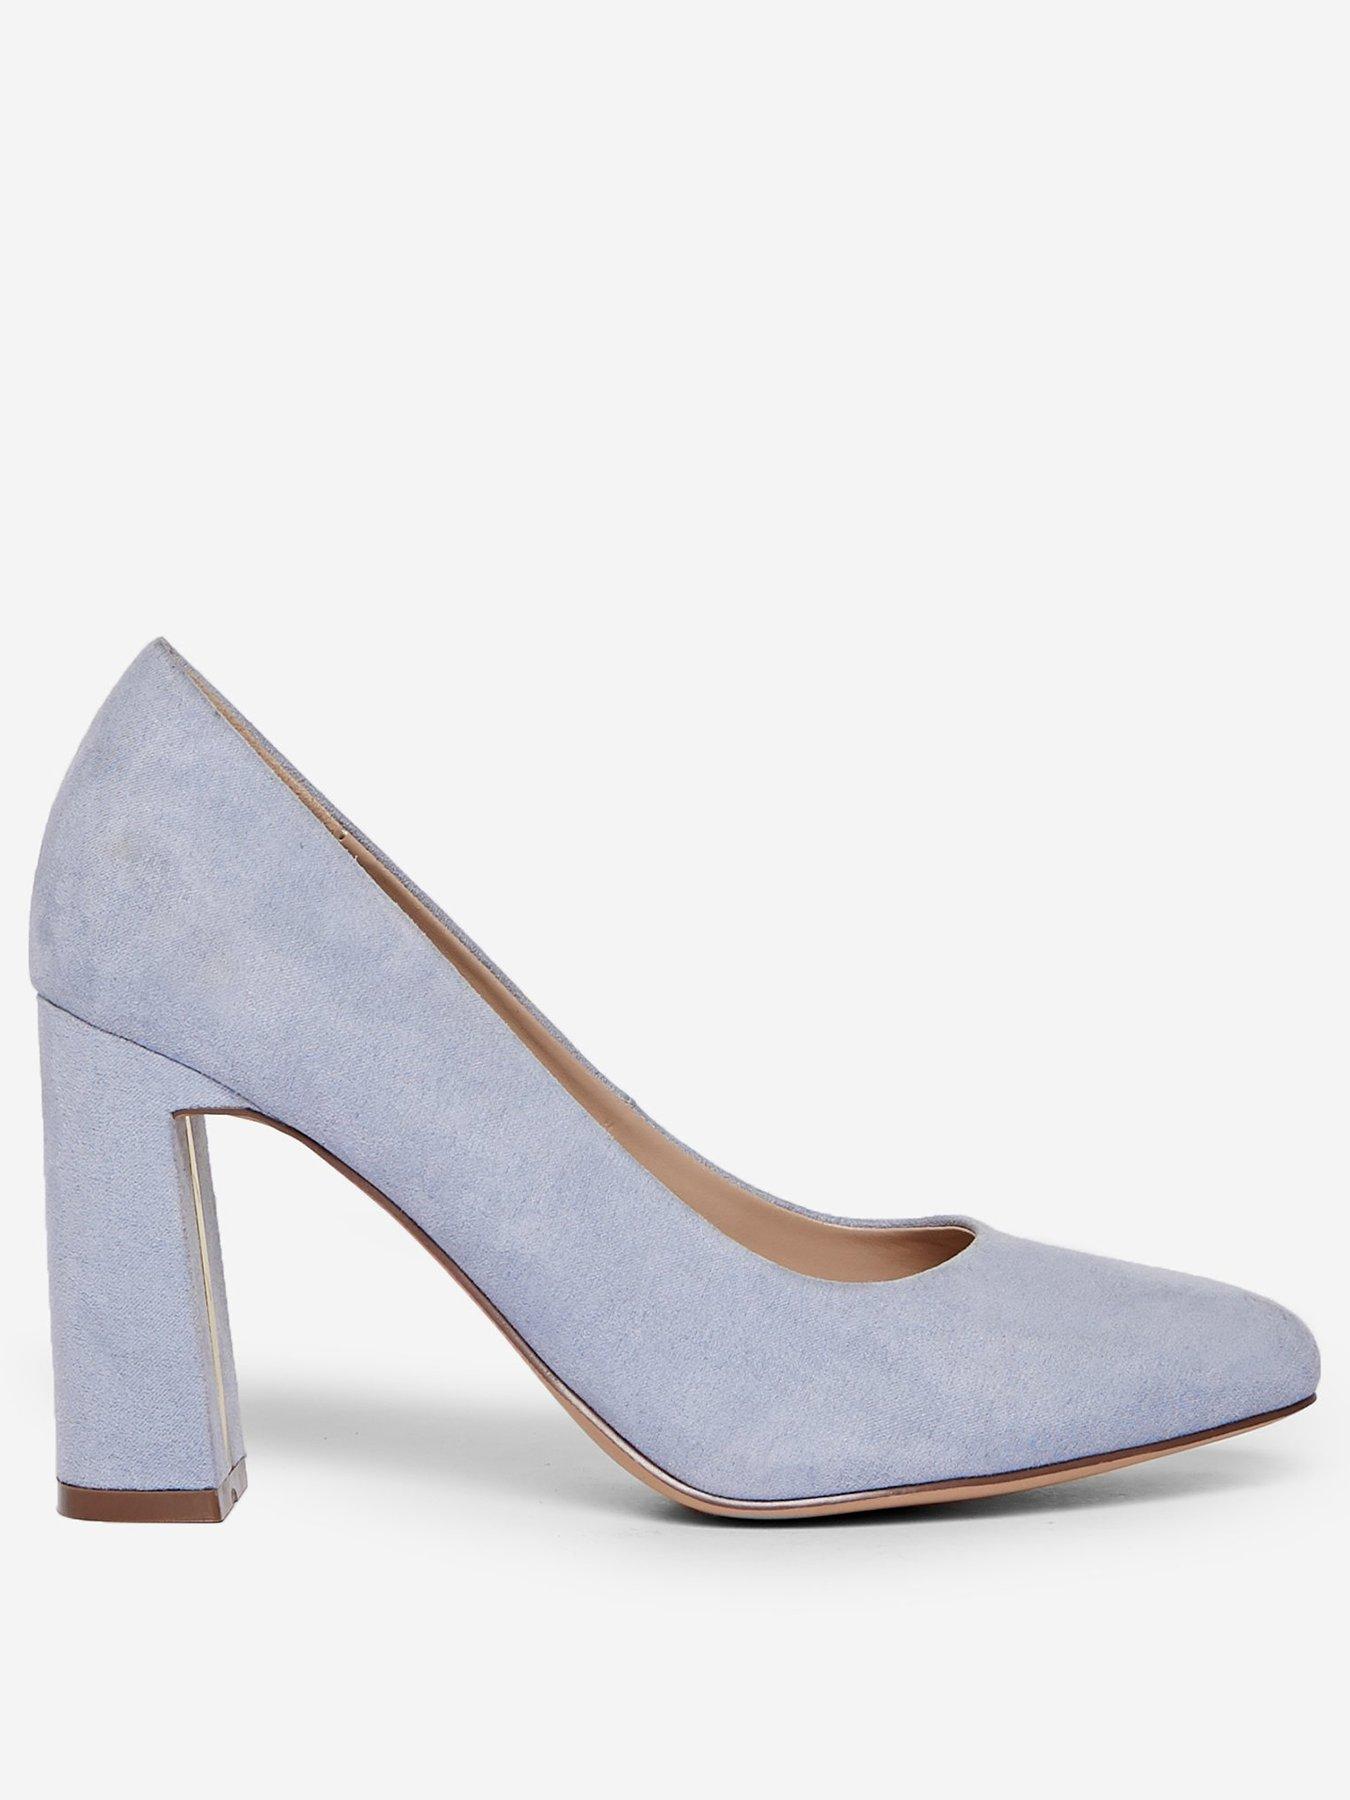 dorothy perkins wide fit shoes